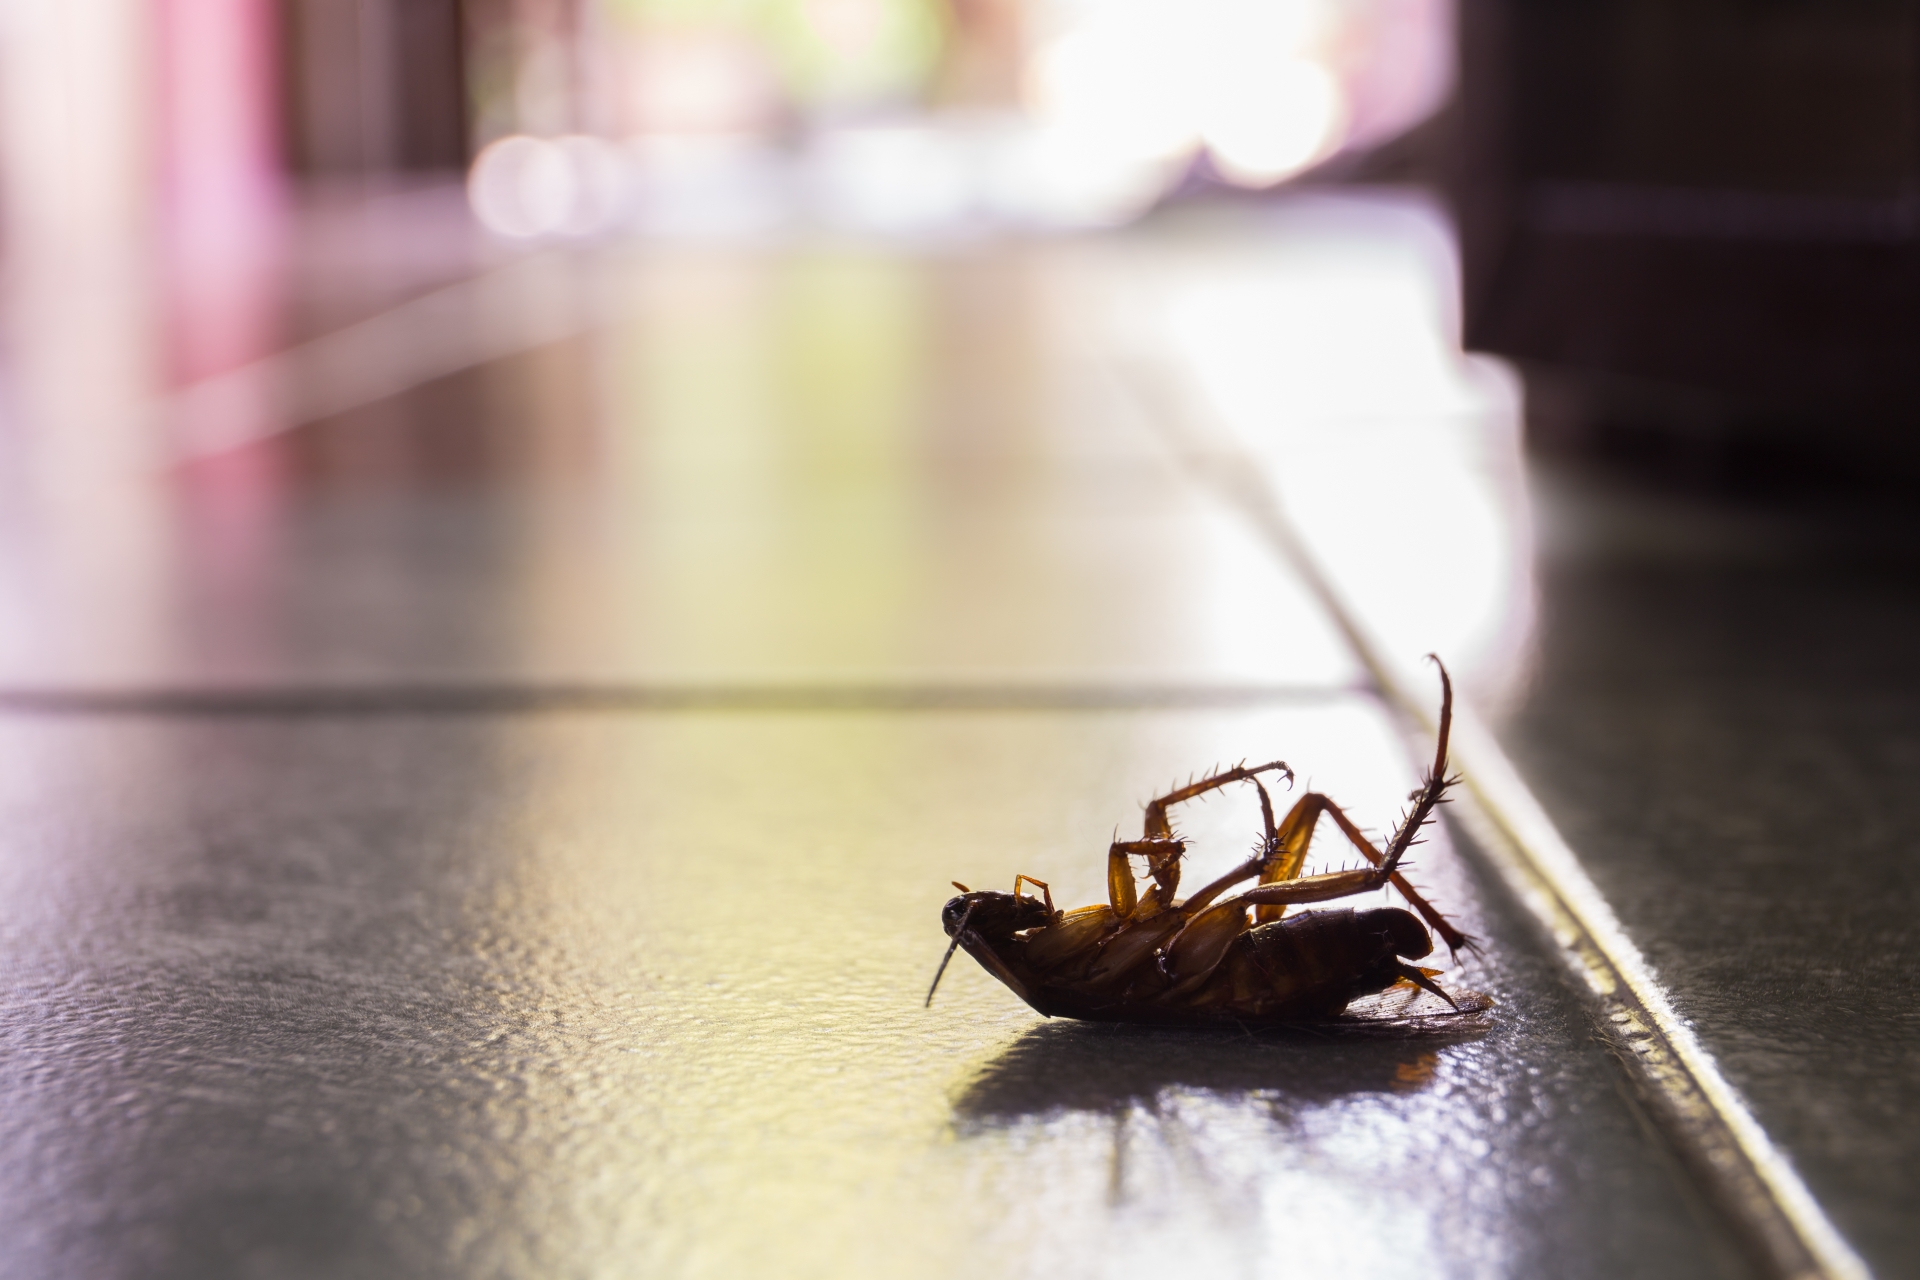 Cockroach Control, Pest Control in Regent's Park, NW1. Call Now 020 8166 9746